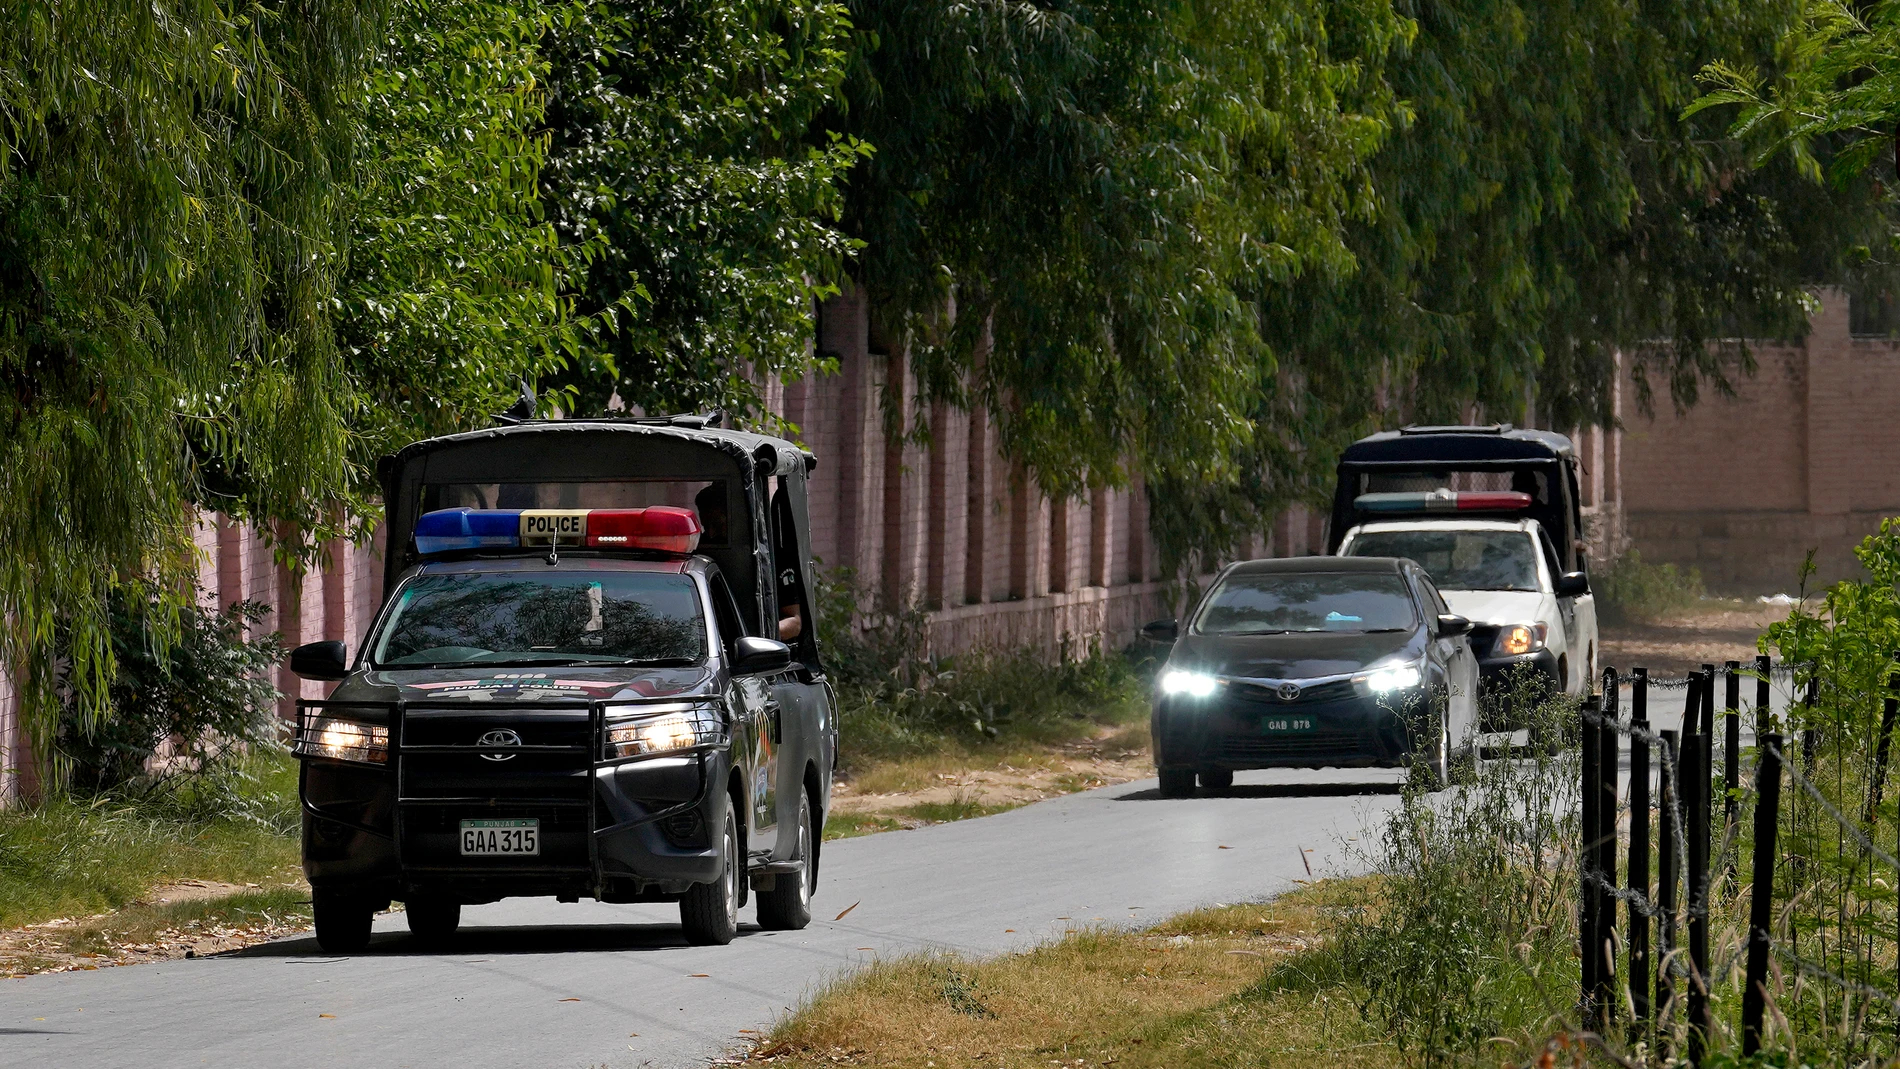 A police squad escort a car carrying a judge of special court leaving after a case hearing of Pakistan's former Prime Minister Imran Khan at the District Jail, in Attock, Pakistan, Wednesday, Aug. 30, 2023. A court asked the official in charge of the Attock prison to keep former Prime Minister Khan there until at least Wednesday, when Khan is expected to face a hearing on charges of "exposing an official secret document" in an incident last year when he waved a confidential diplomatic letter ...